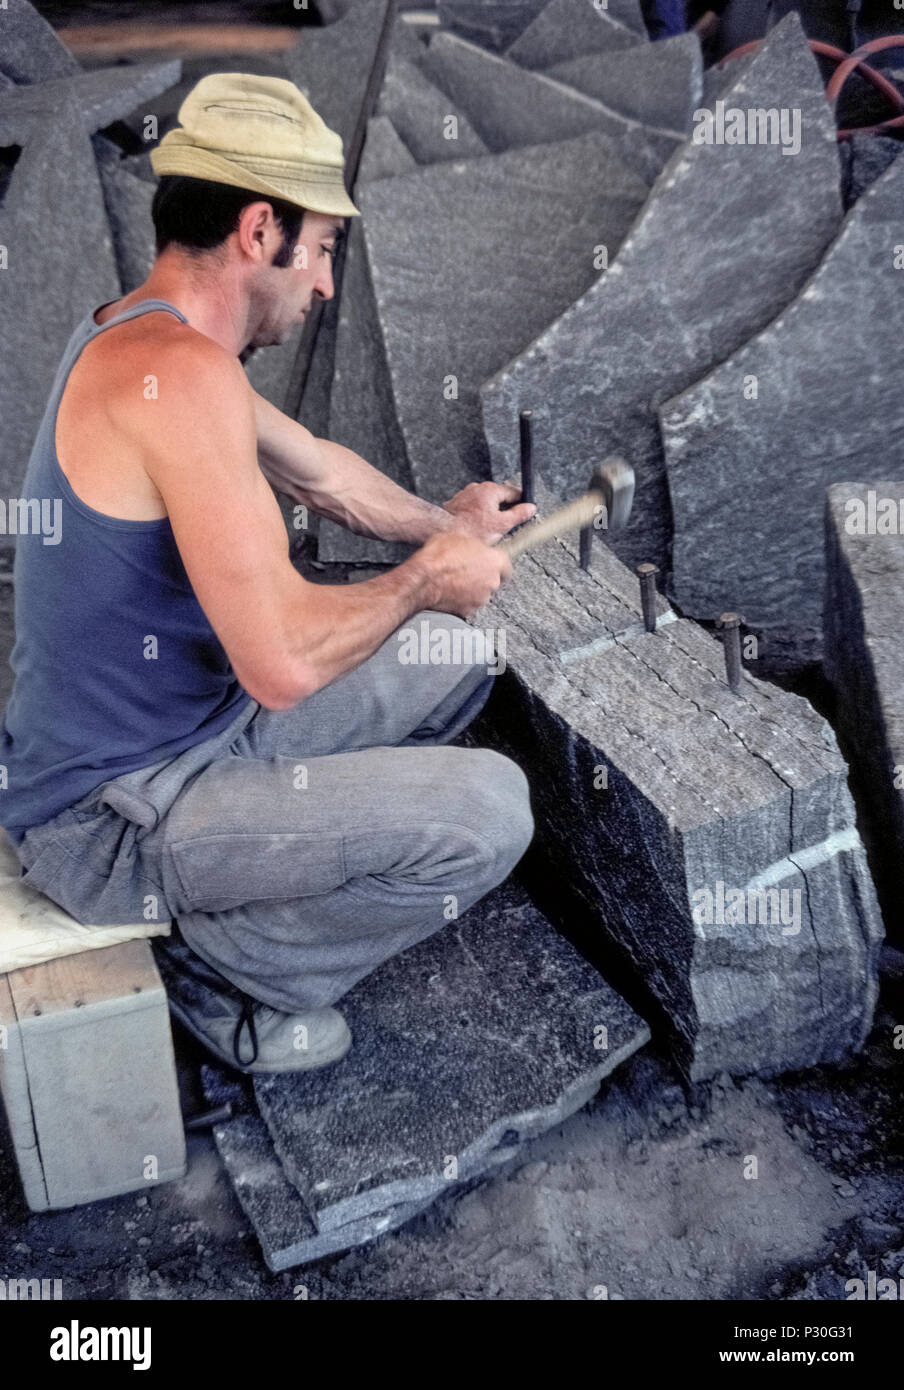 A professional stonecutter hammers a set of chisels into a crack in a block  of granite to separate a slab of the stone at a quarry in Riveo, a town in  the